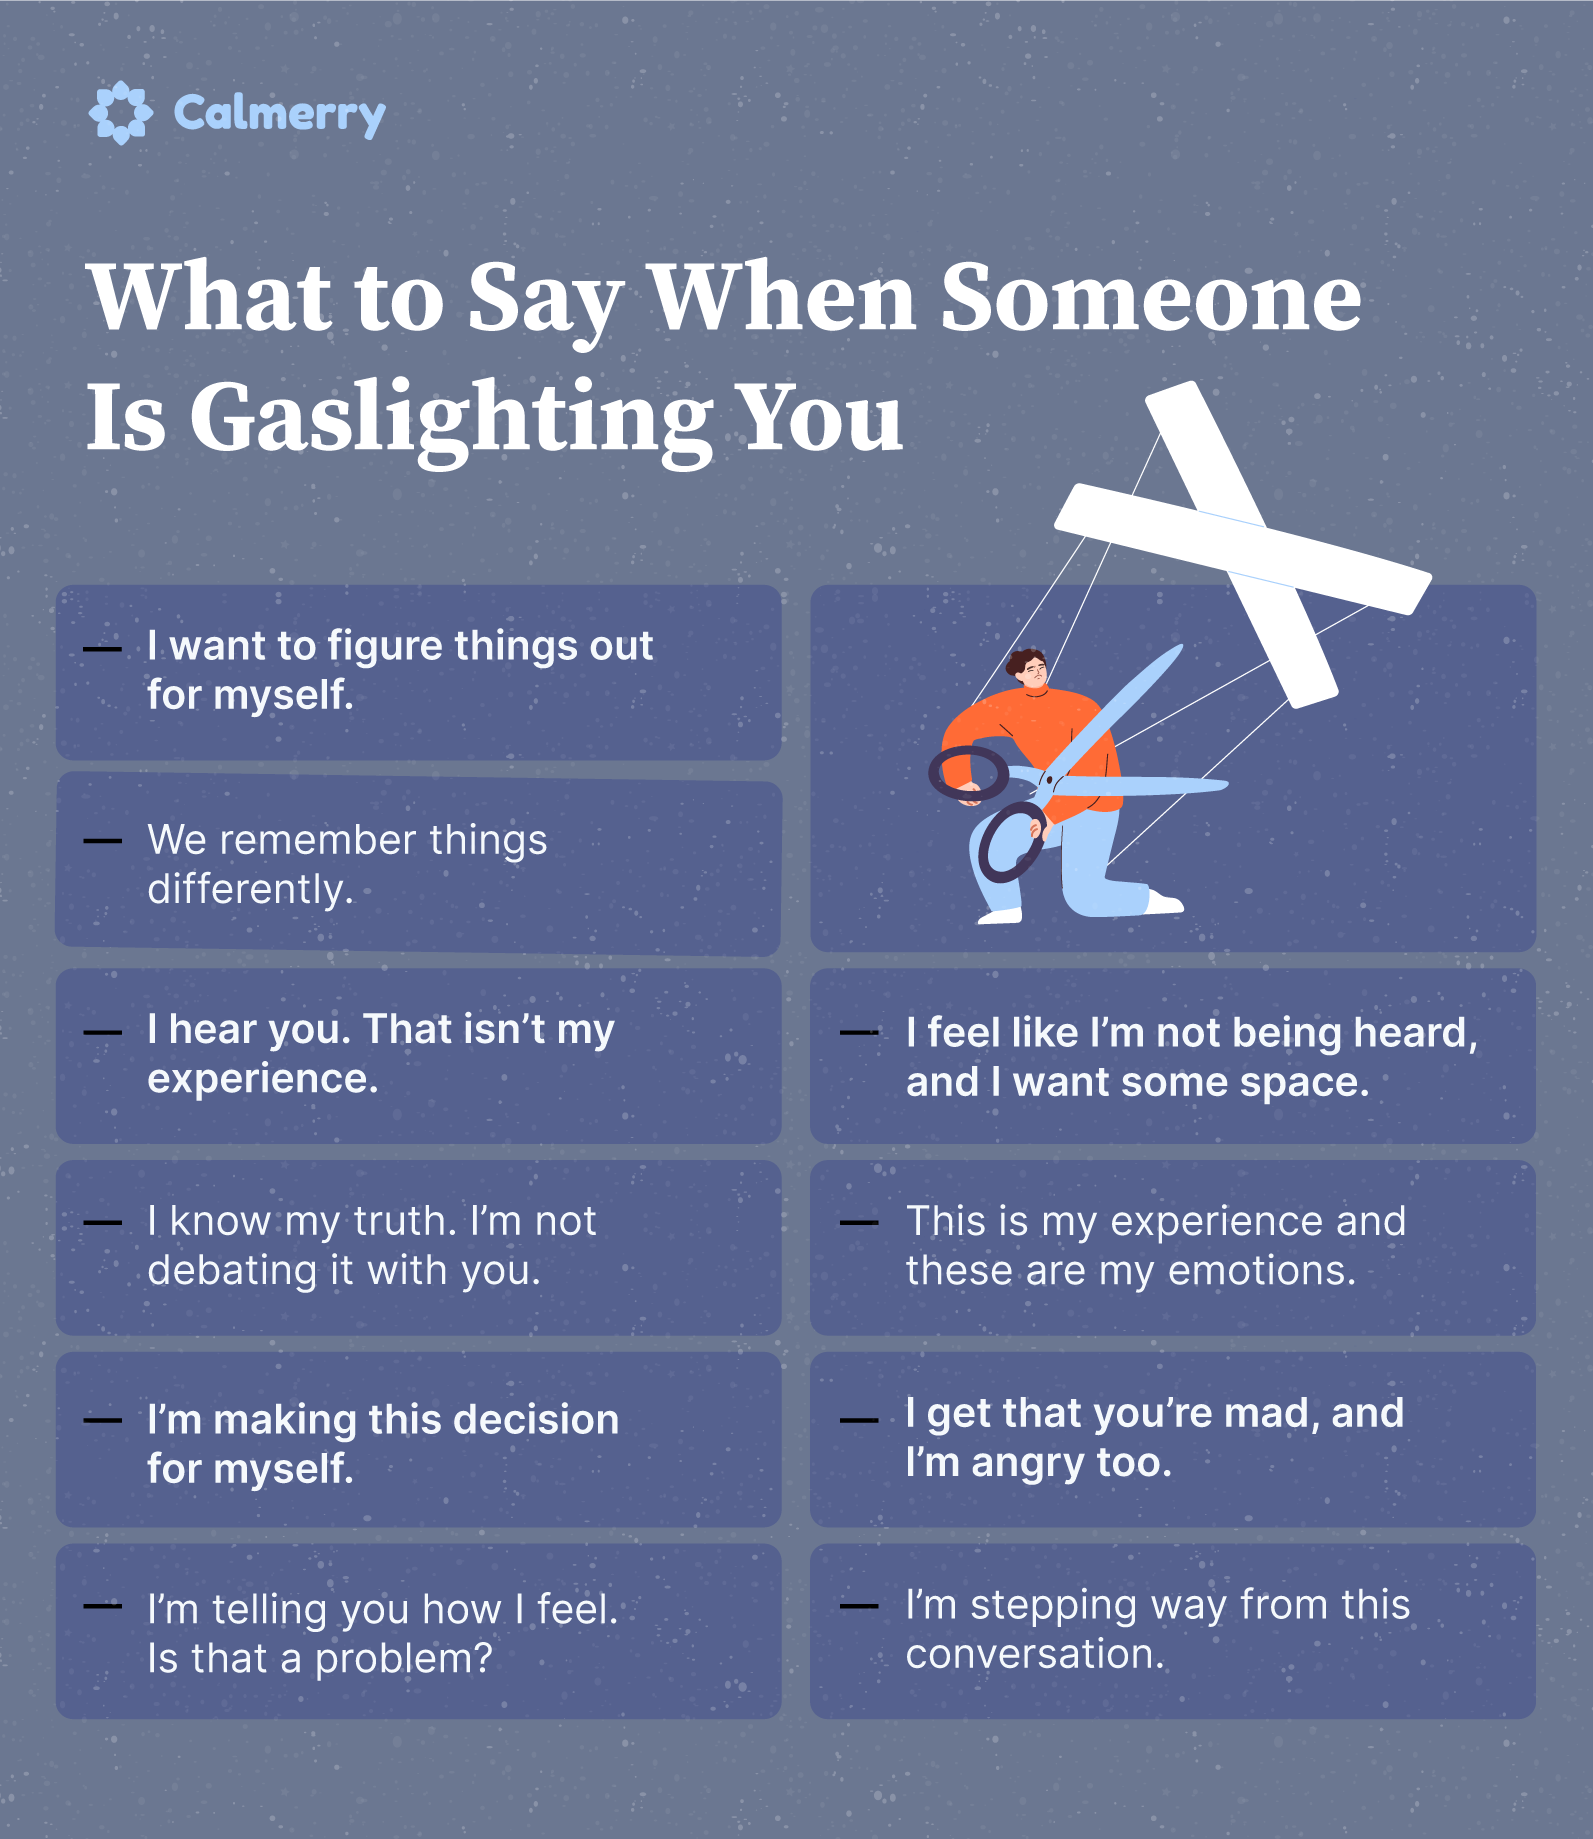 How to deal with gaslighting